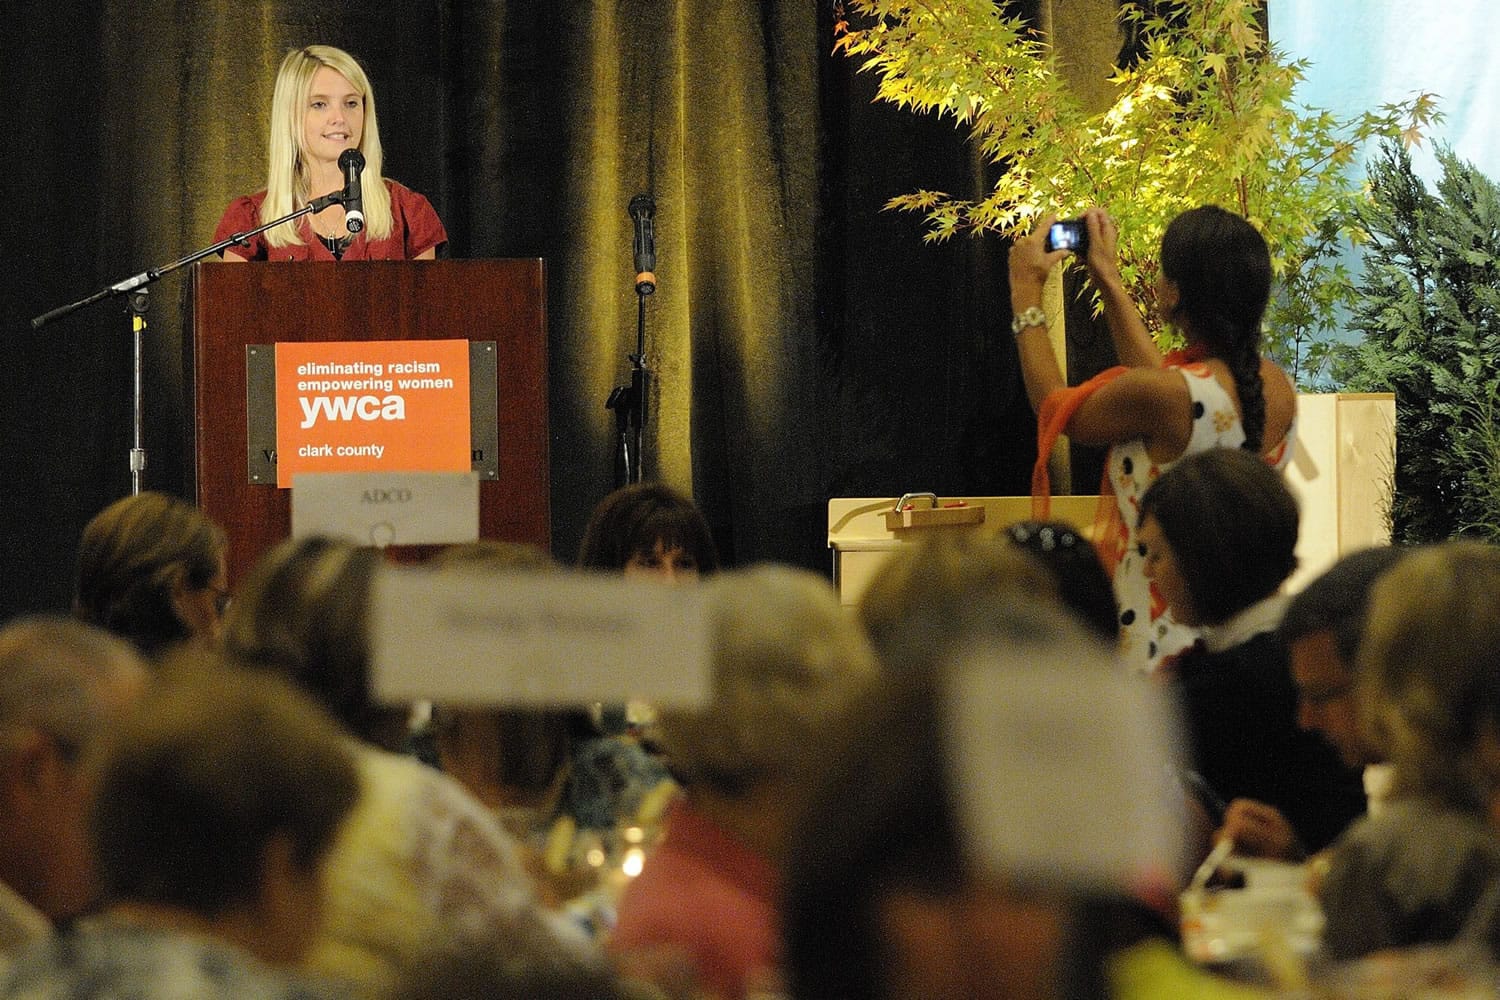 Author and activist Erin Merryn tells her story of sexual abuse at a YWCA luncheon on Wednesday in Vancouver.